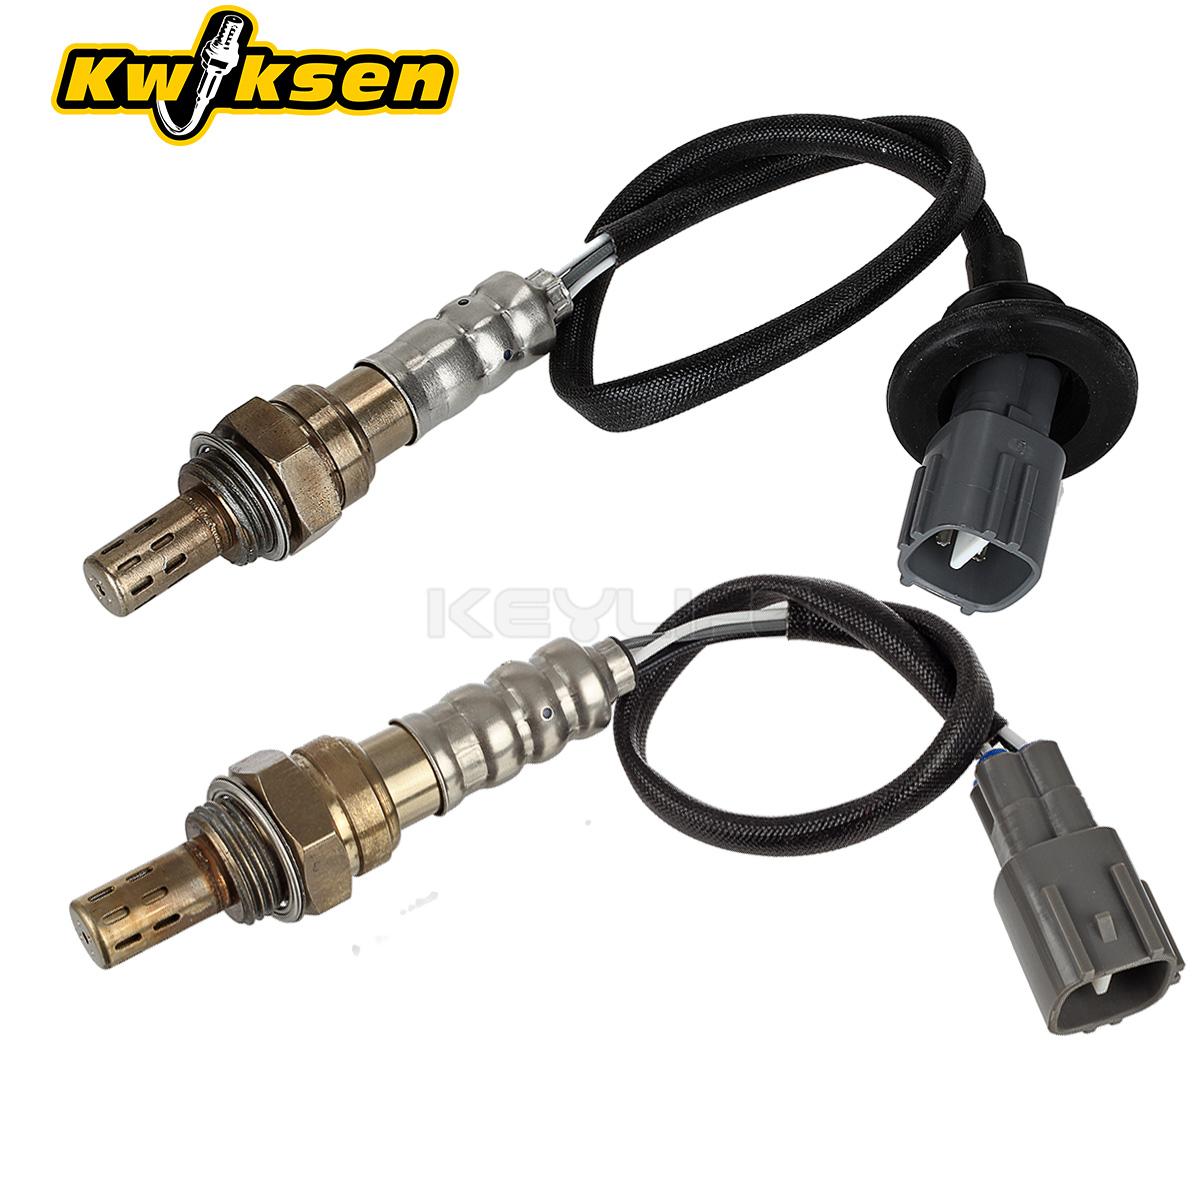 2x Upstream and Downstream O2 Oxygen Sensors for 04-09 Toyota Prius 1.5L 1NZFXE